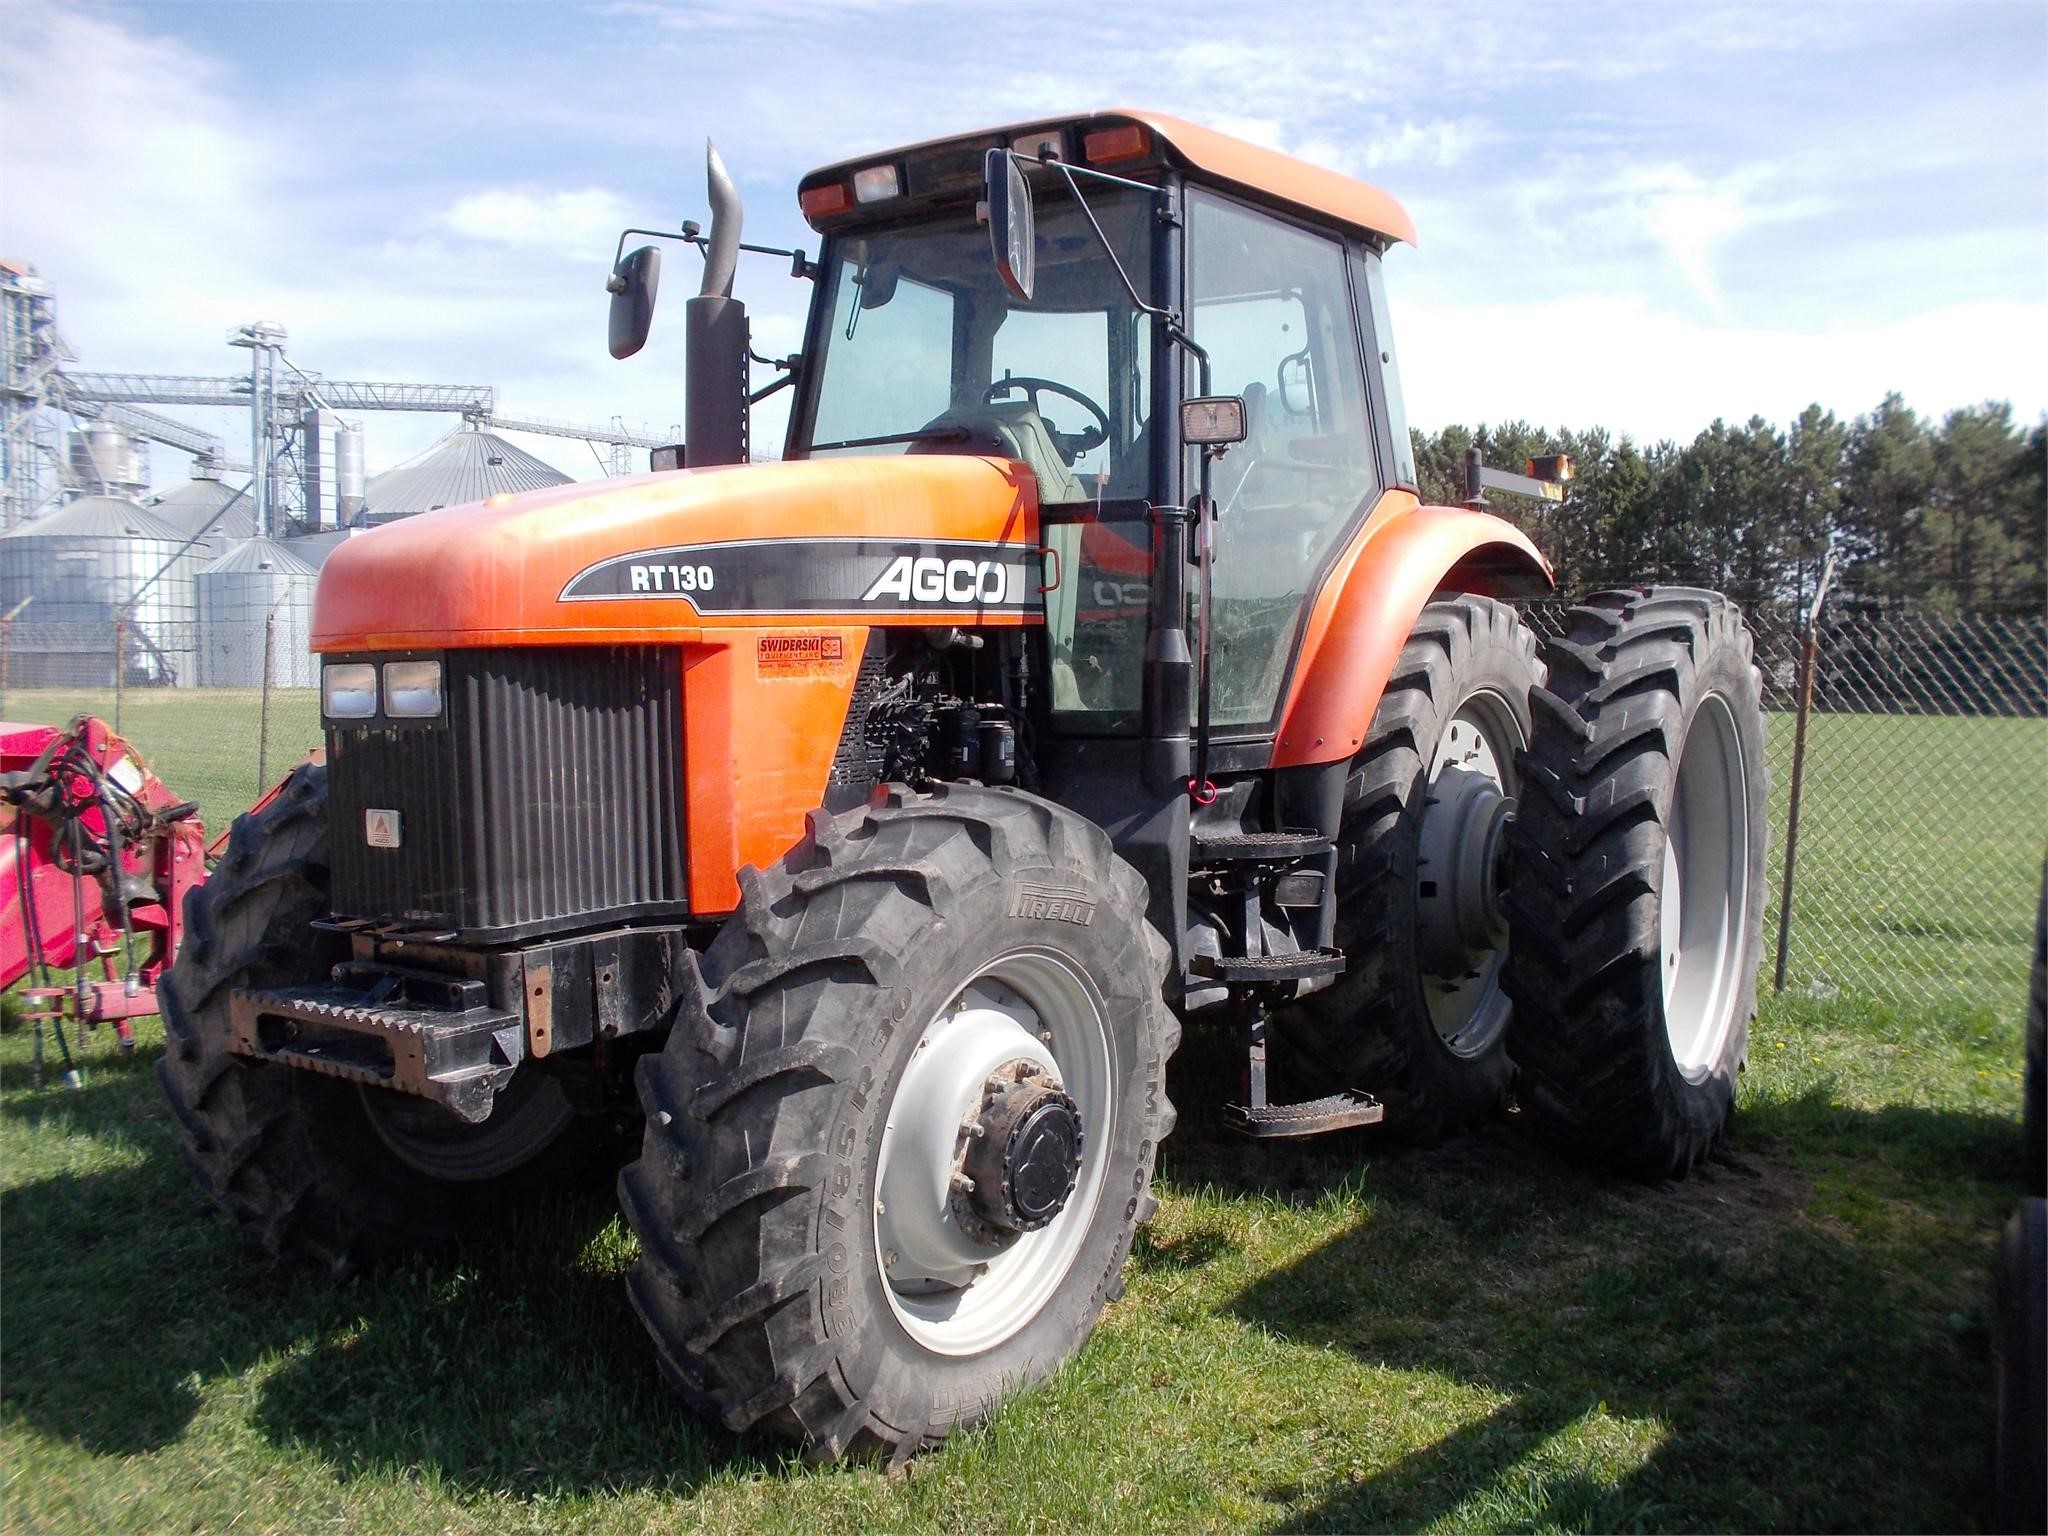 2003 AGCO RT130 100-174 HP Tractor | 4102 hrs. $39,999.00